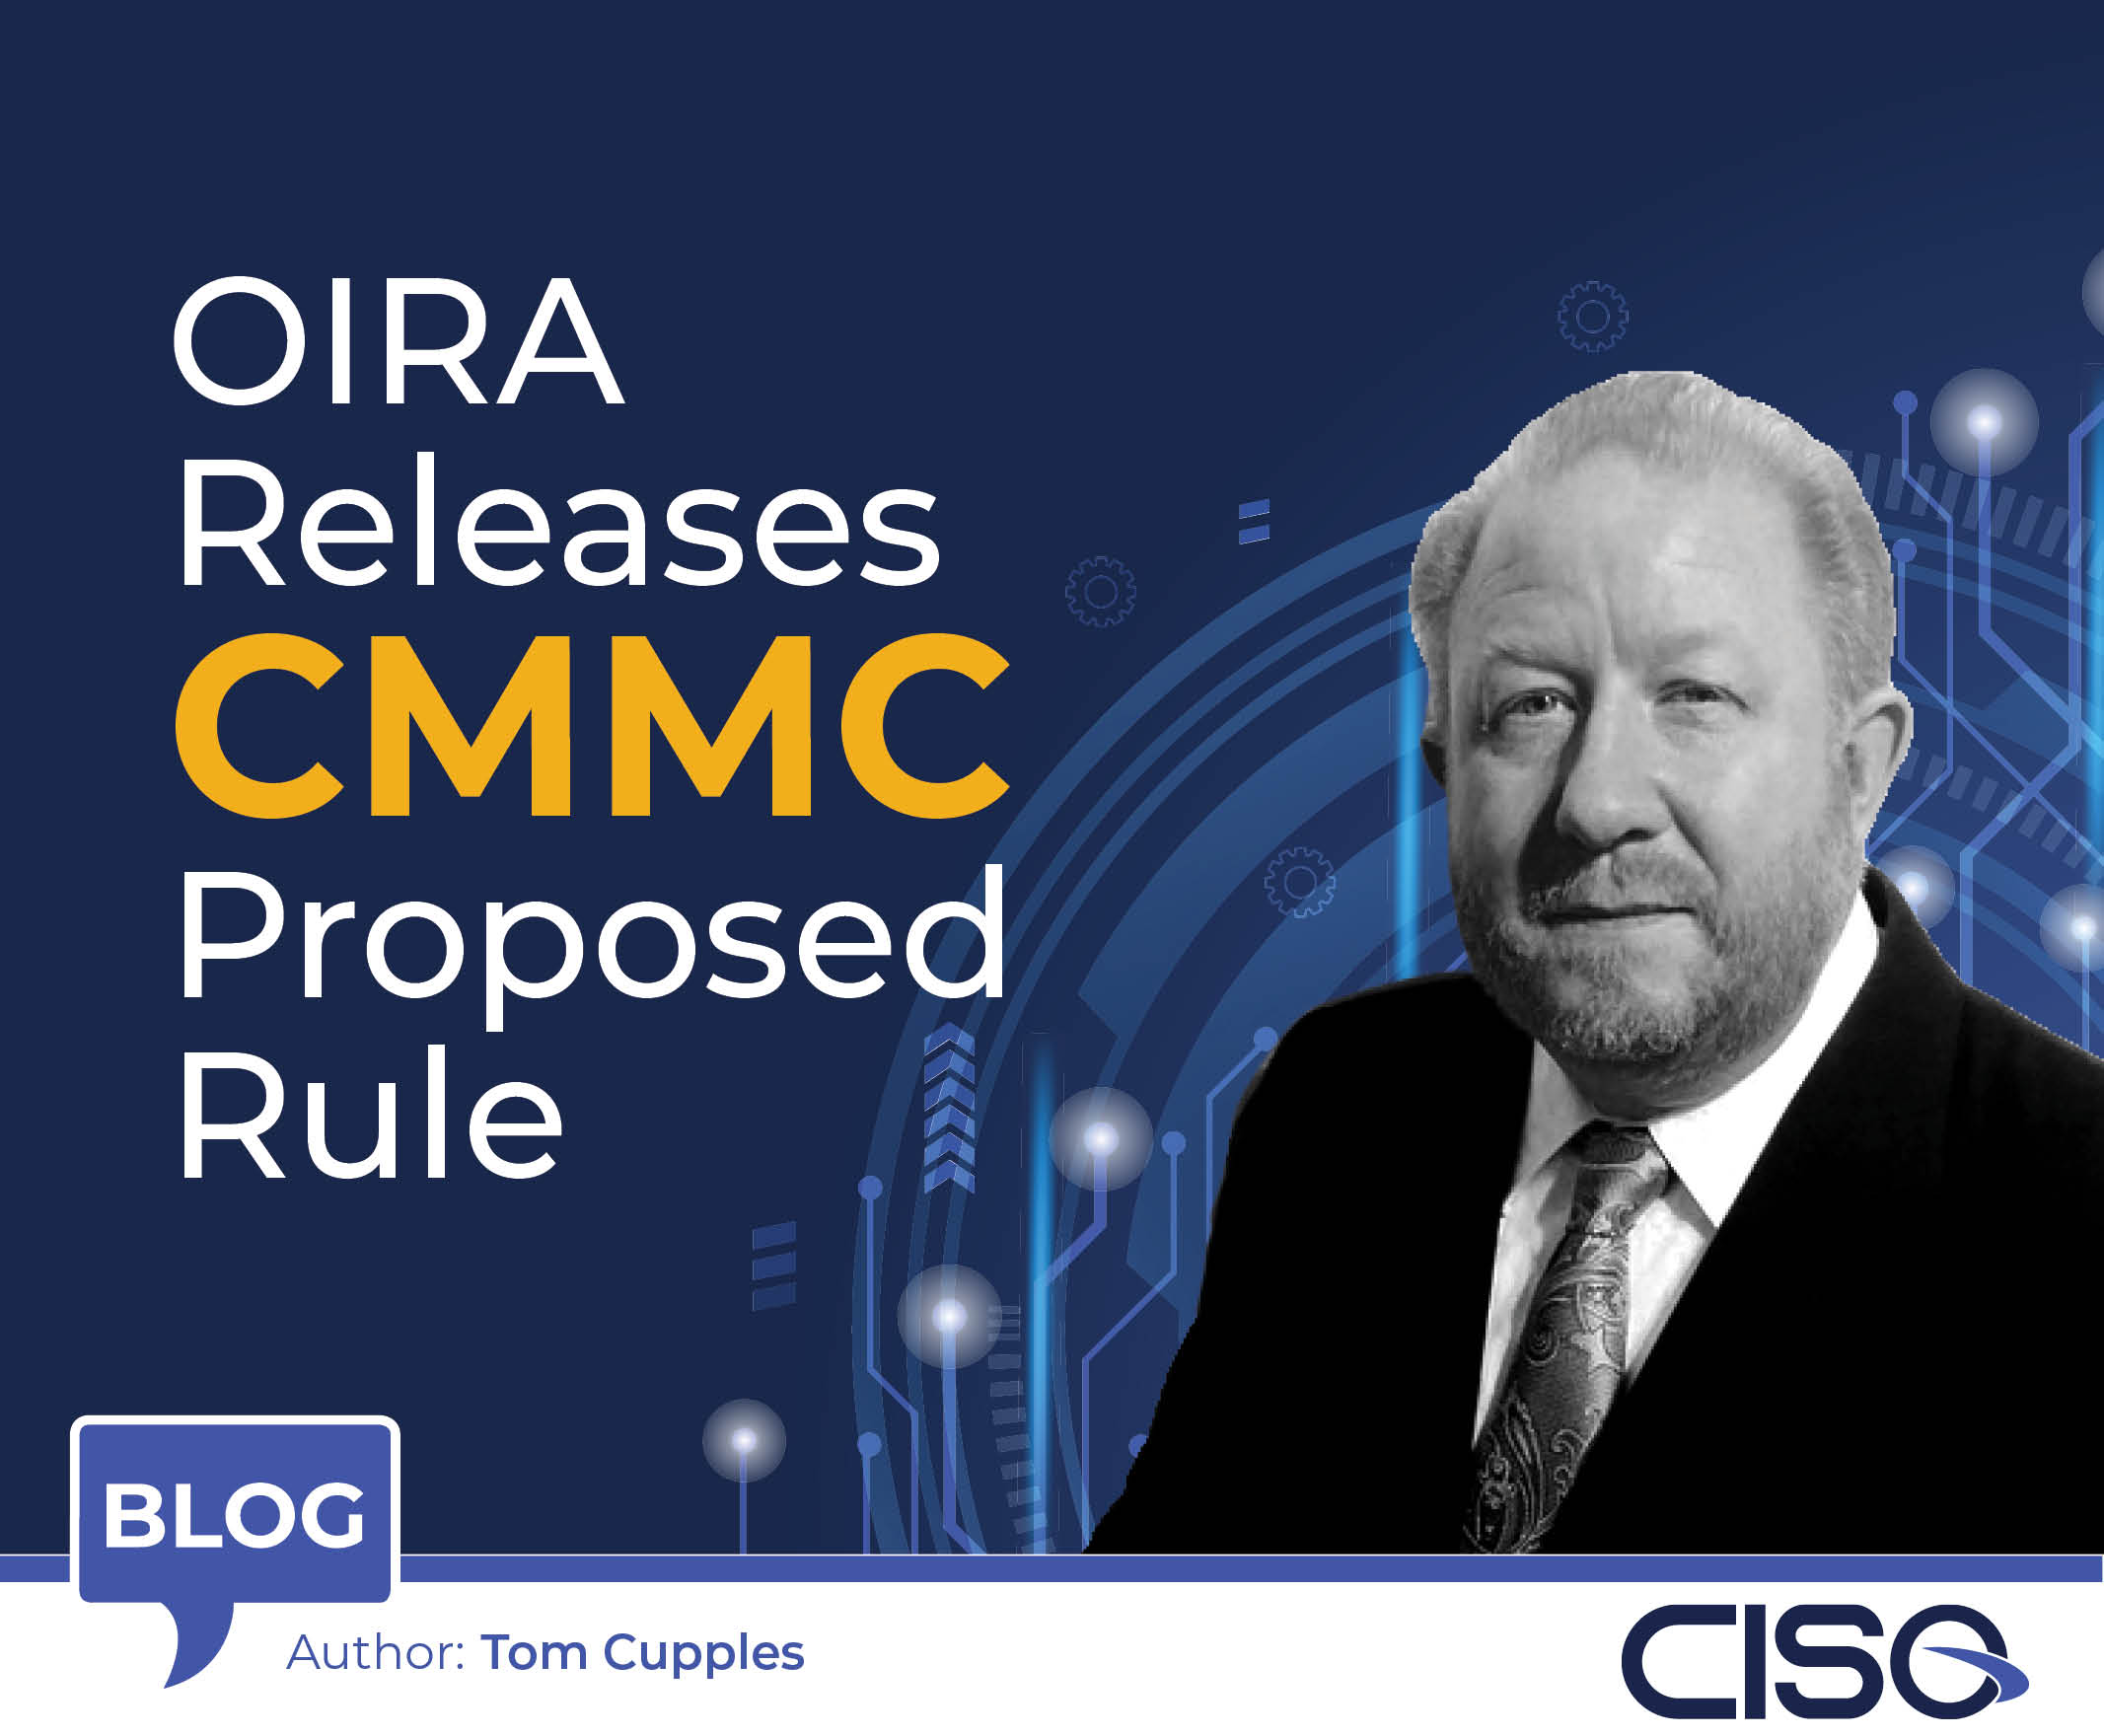 OIRA Releases CMMC Proposed Rule 